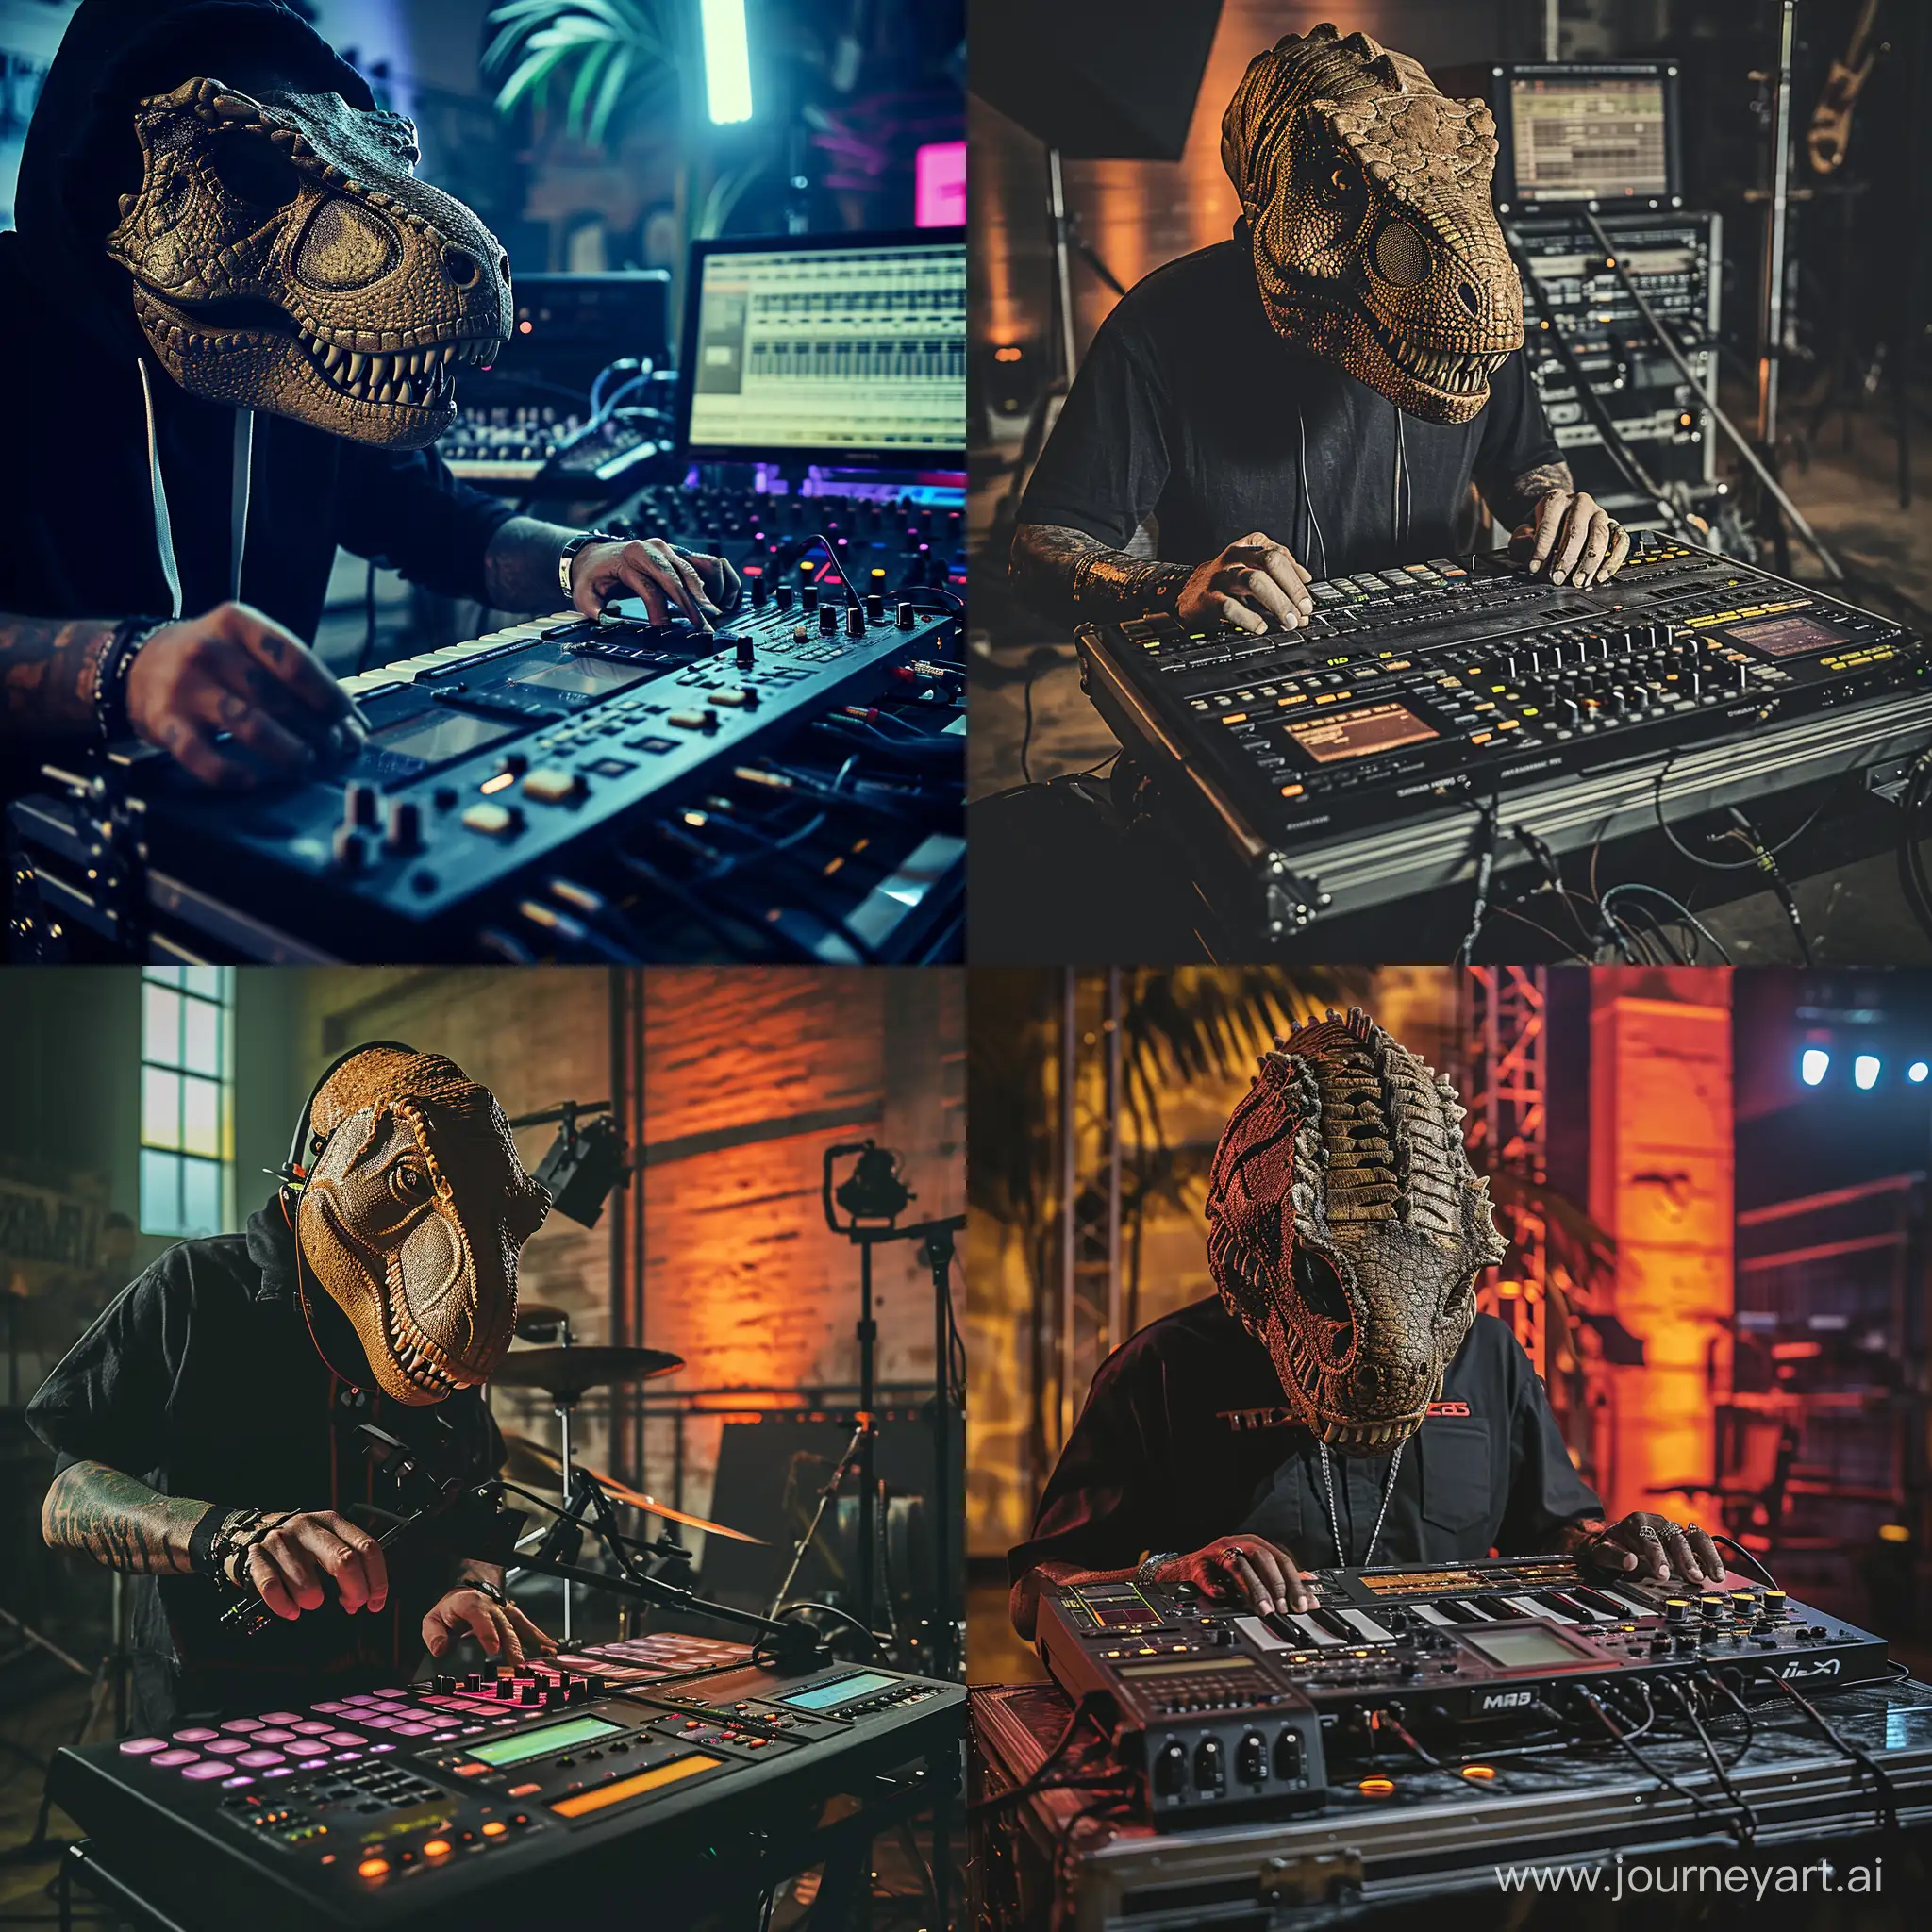 Generate an T-Rex mask man with a head proportionate to his body,  man creating music on a distinctive drum controller MPC, with large pads and a display, set in a studio environment." , gritty vibe wide shot, ALEXA 65 from ARRI Rental , Nick Summerer shot, dramatic and moody lighting, street cinematography style, man is in front perspective,  different camera angles